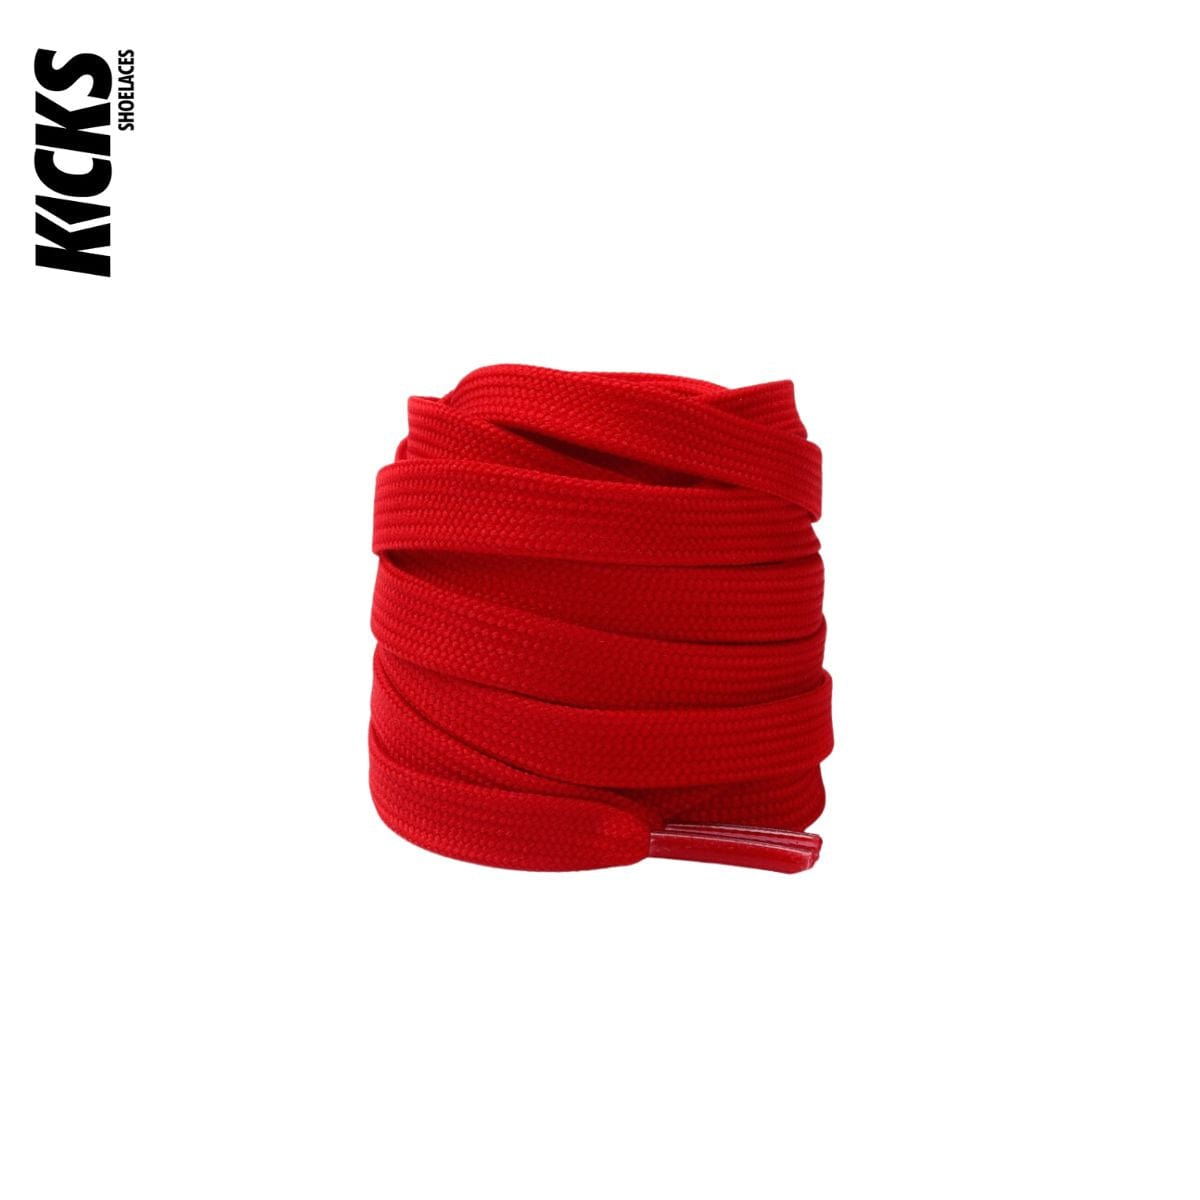 Red Replacement Shoe Laces for Adidas NMD Sneakers by Kicks Shoelaces